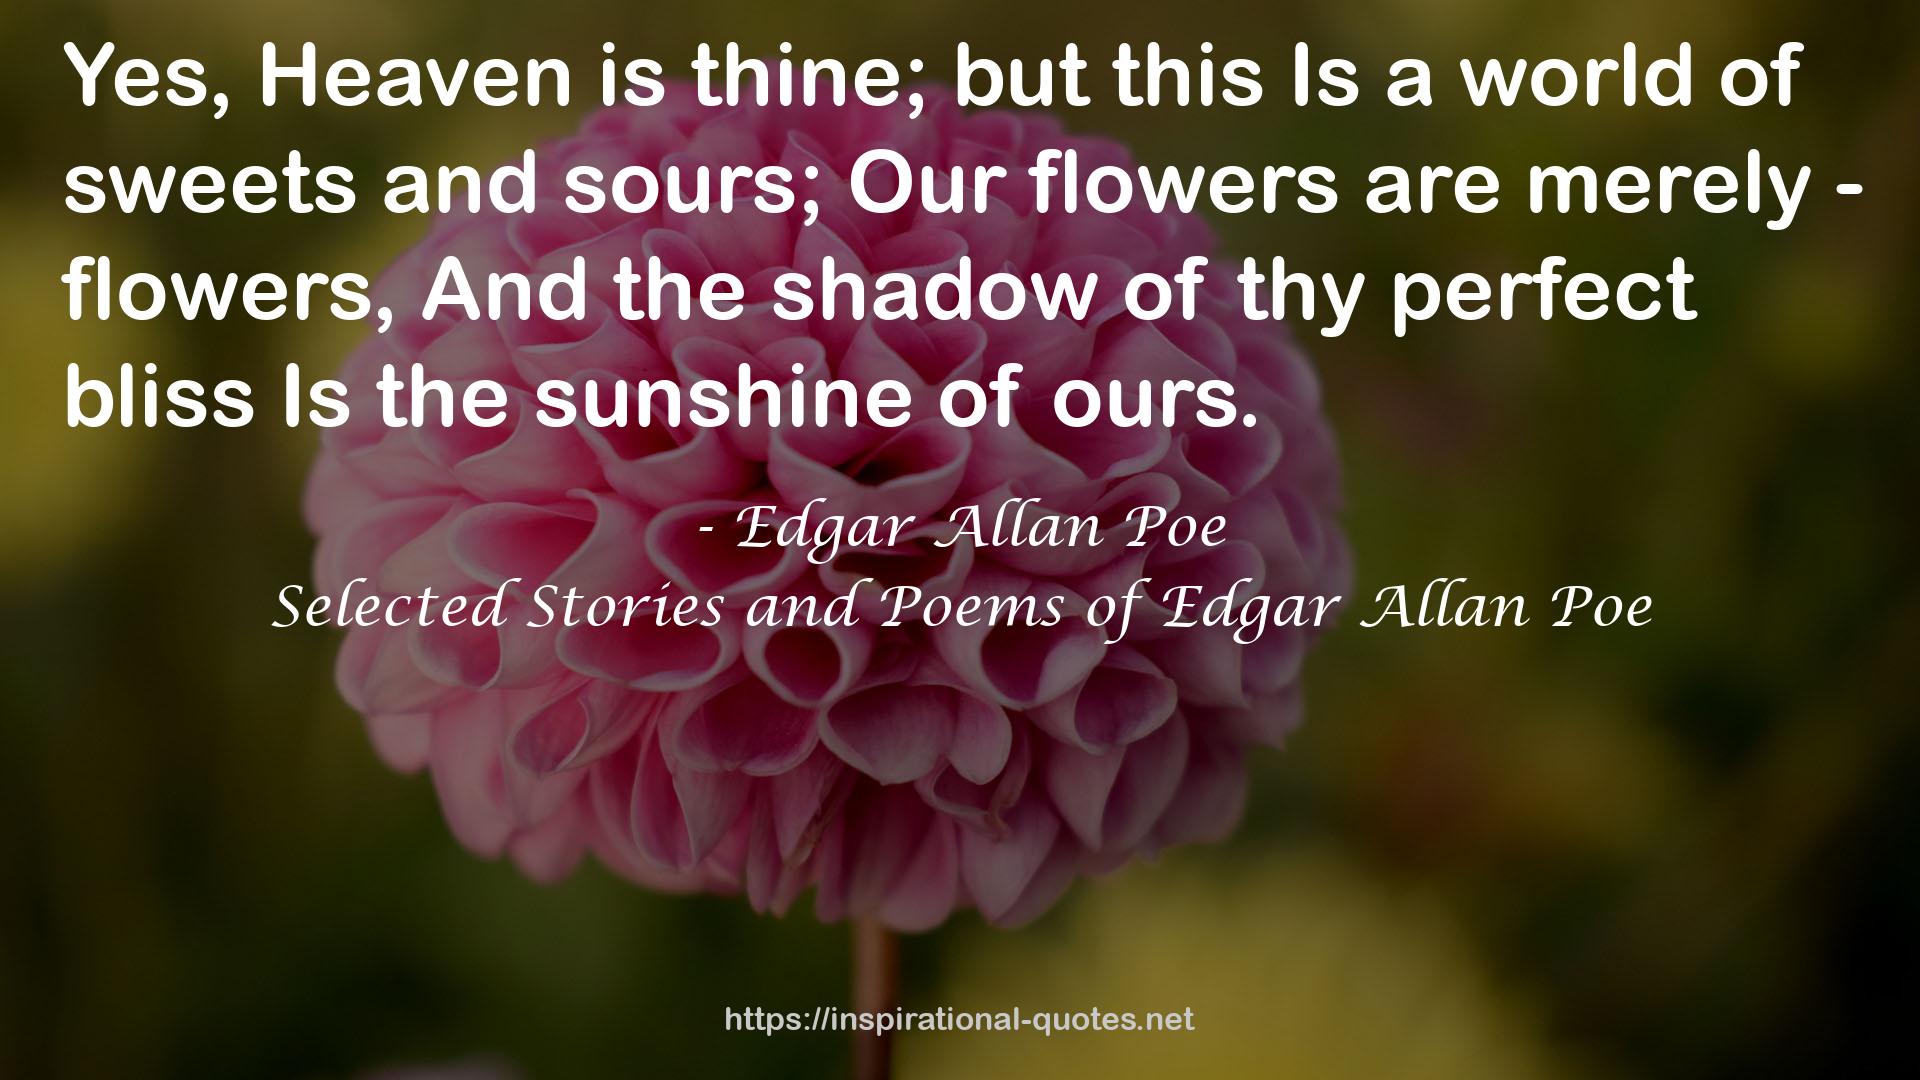 Selected Stories and Poems of Edgar Allan Poe QUOTES